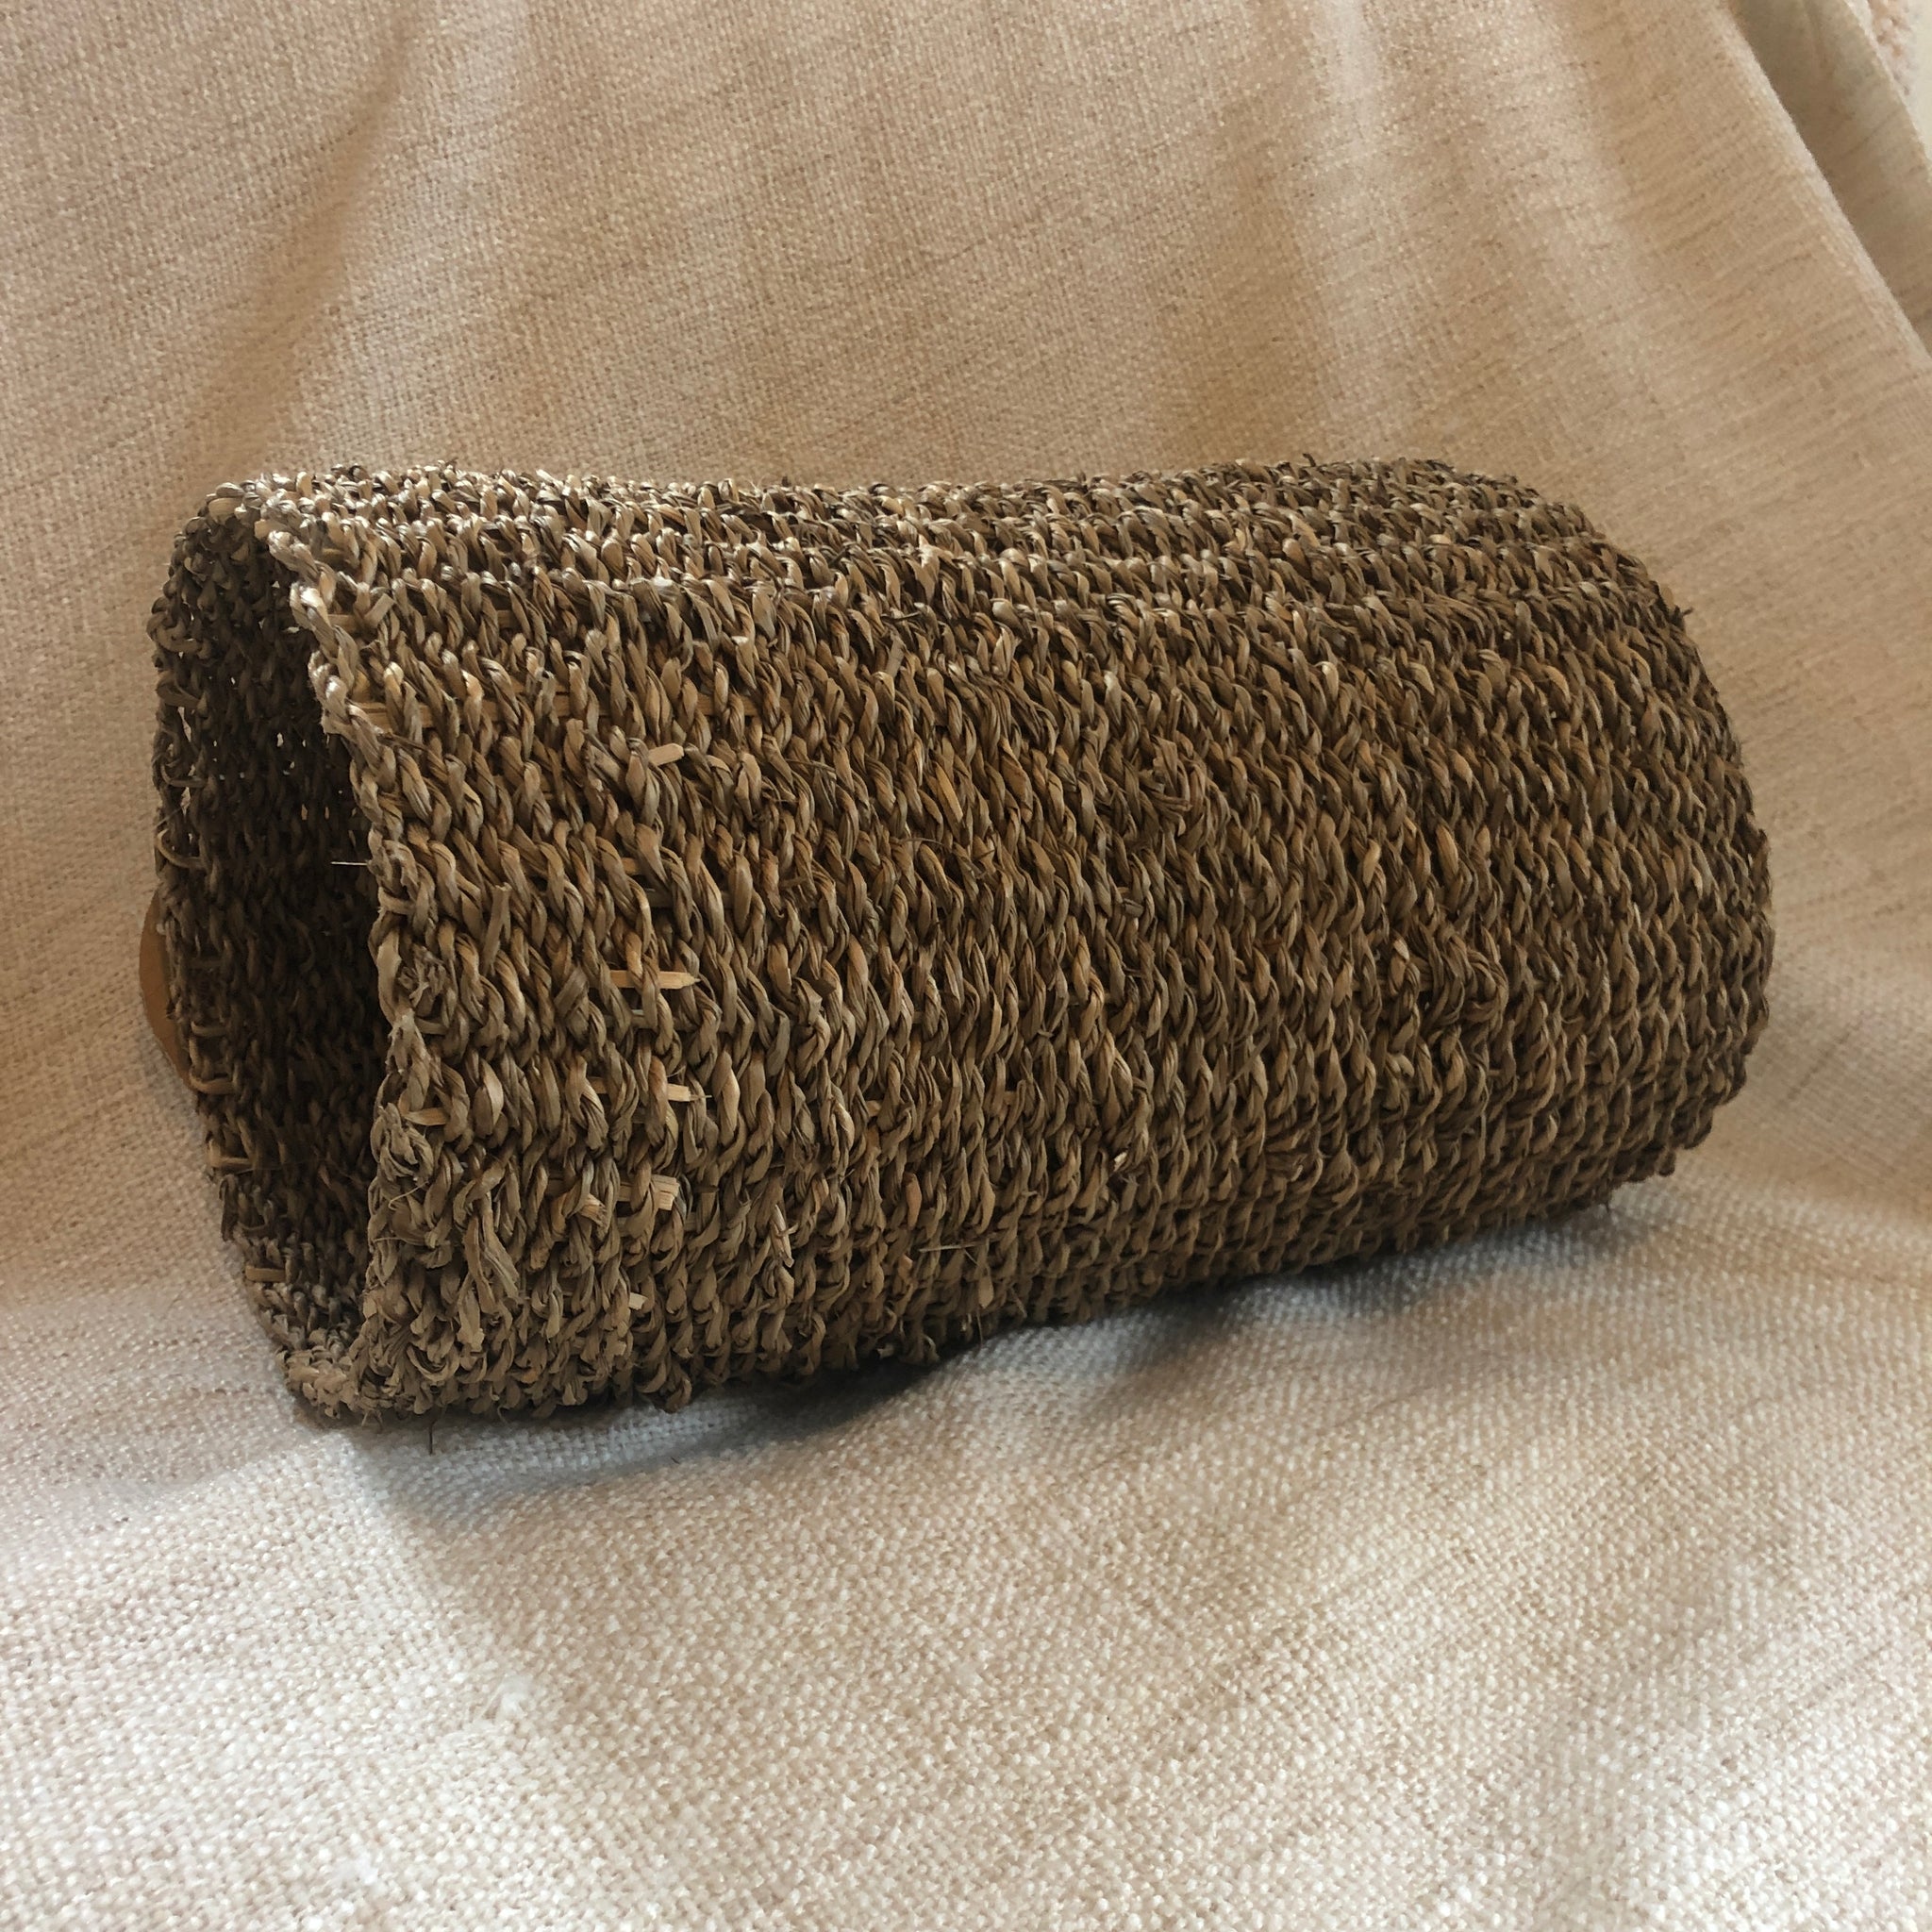 Rosewood rabbit tunnel made of seagrass and rattan, large size.